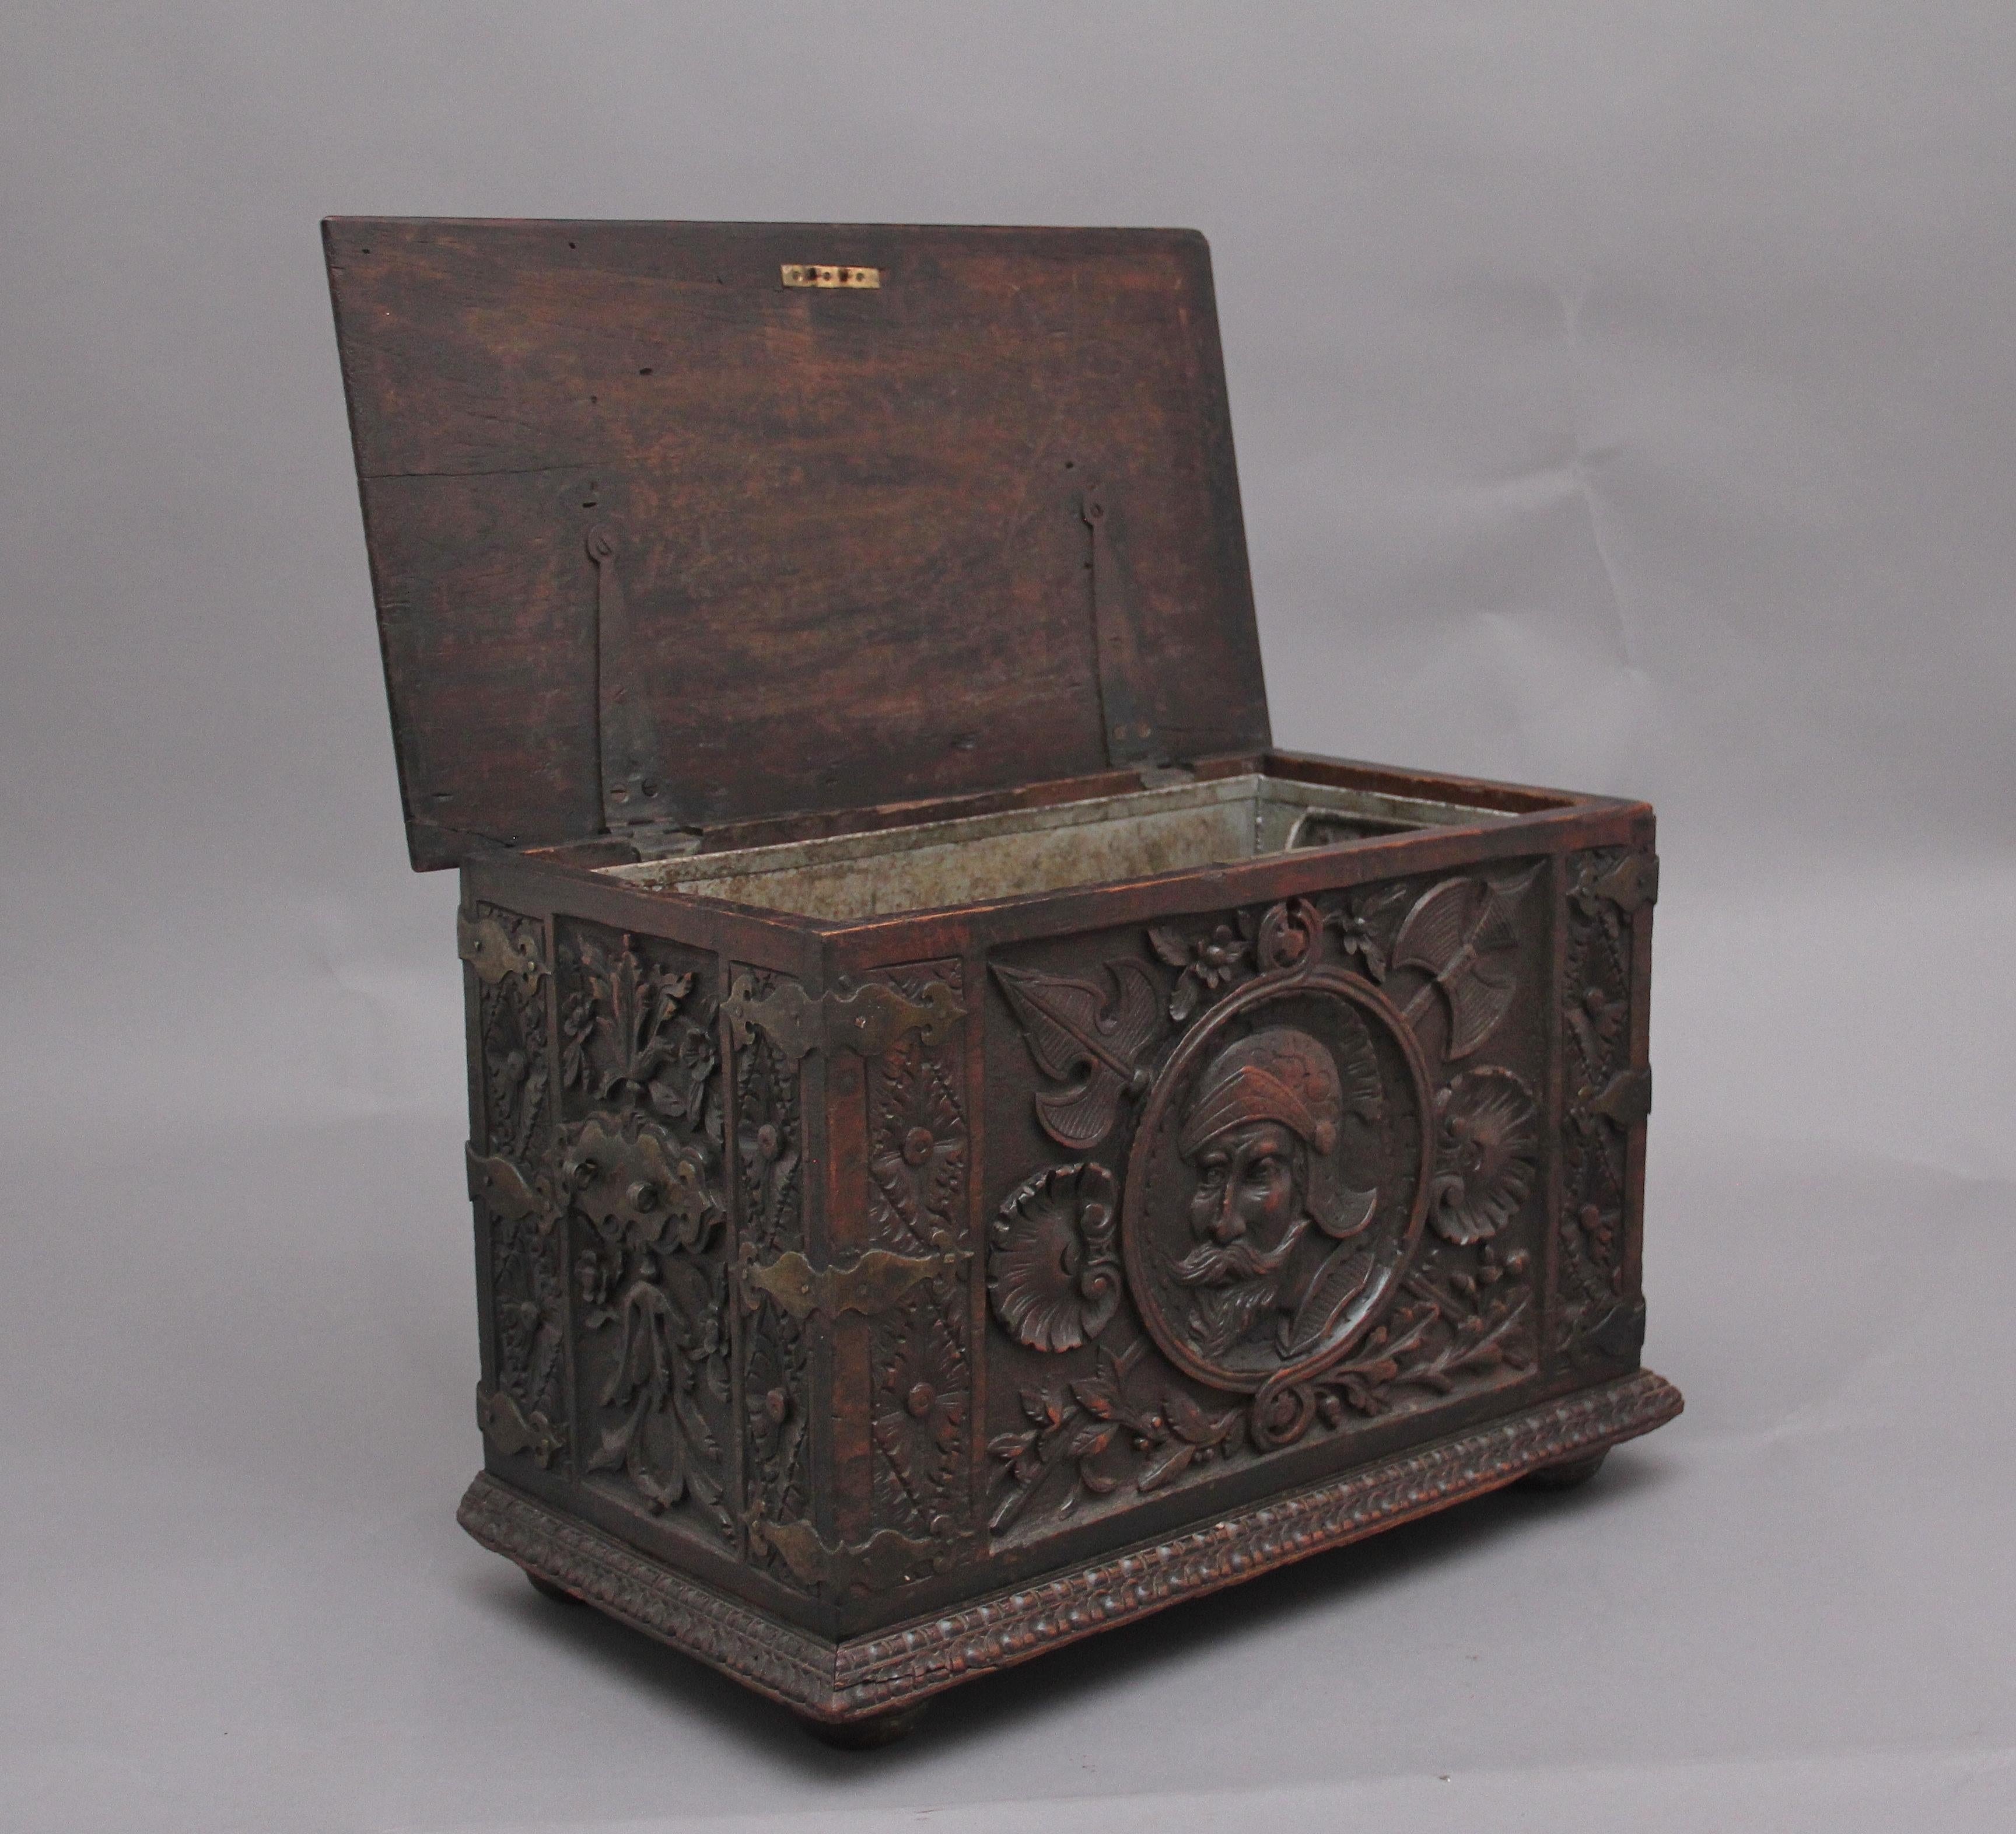 19th century carved oak log box, profusely carved all over, the top having a coat of arms with dragons either side, the hinged top opening to reveal a large storage space for logs, the corners having brass straps, standing on turned bun feet. Lovely